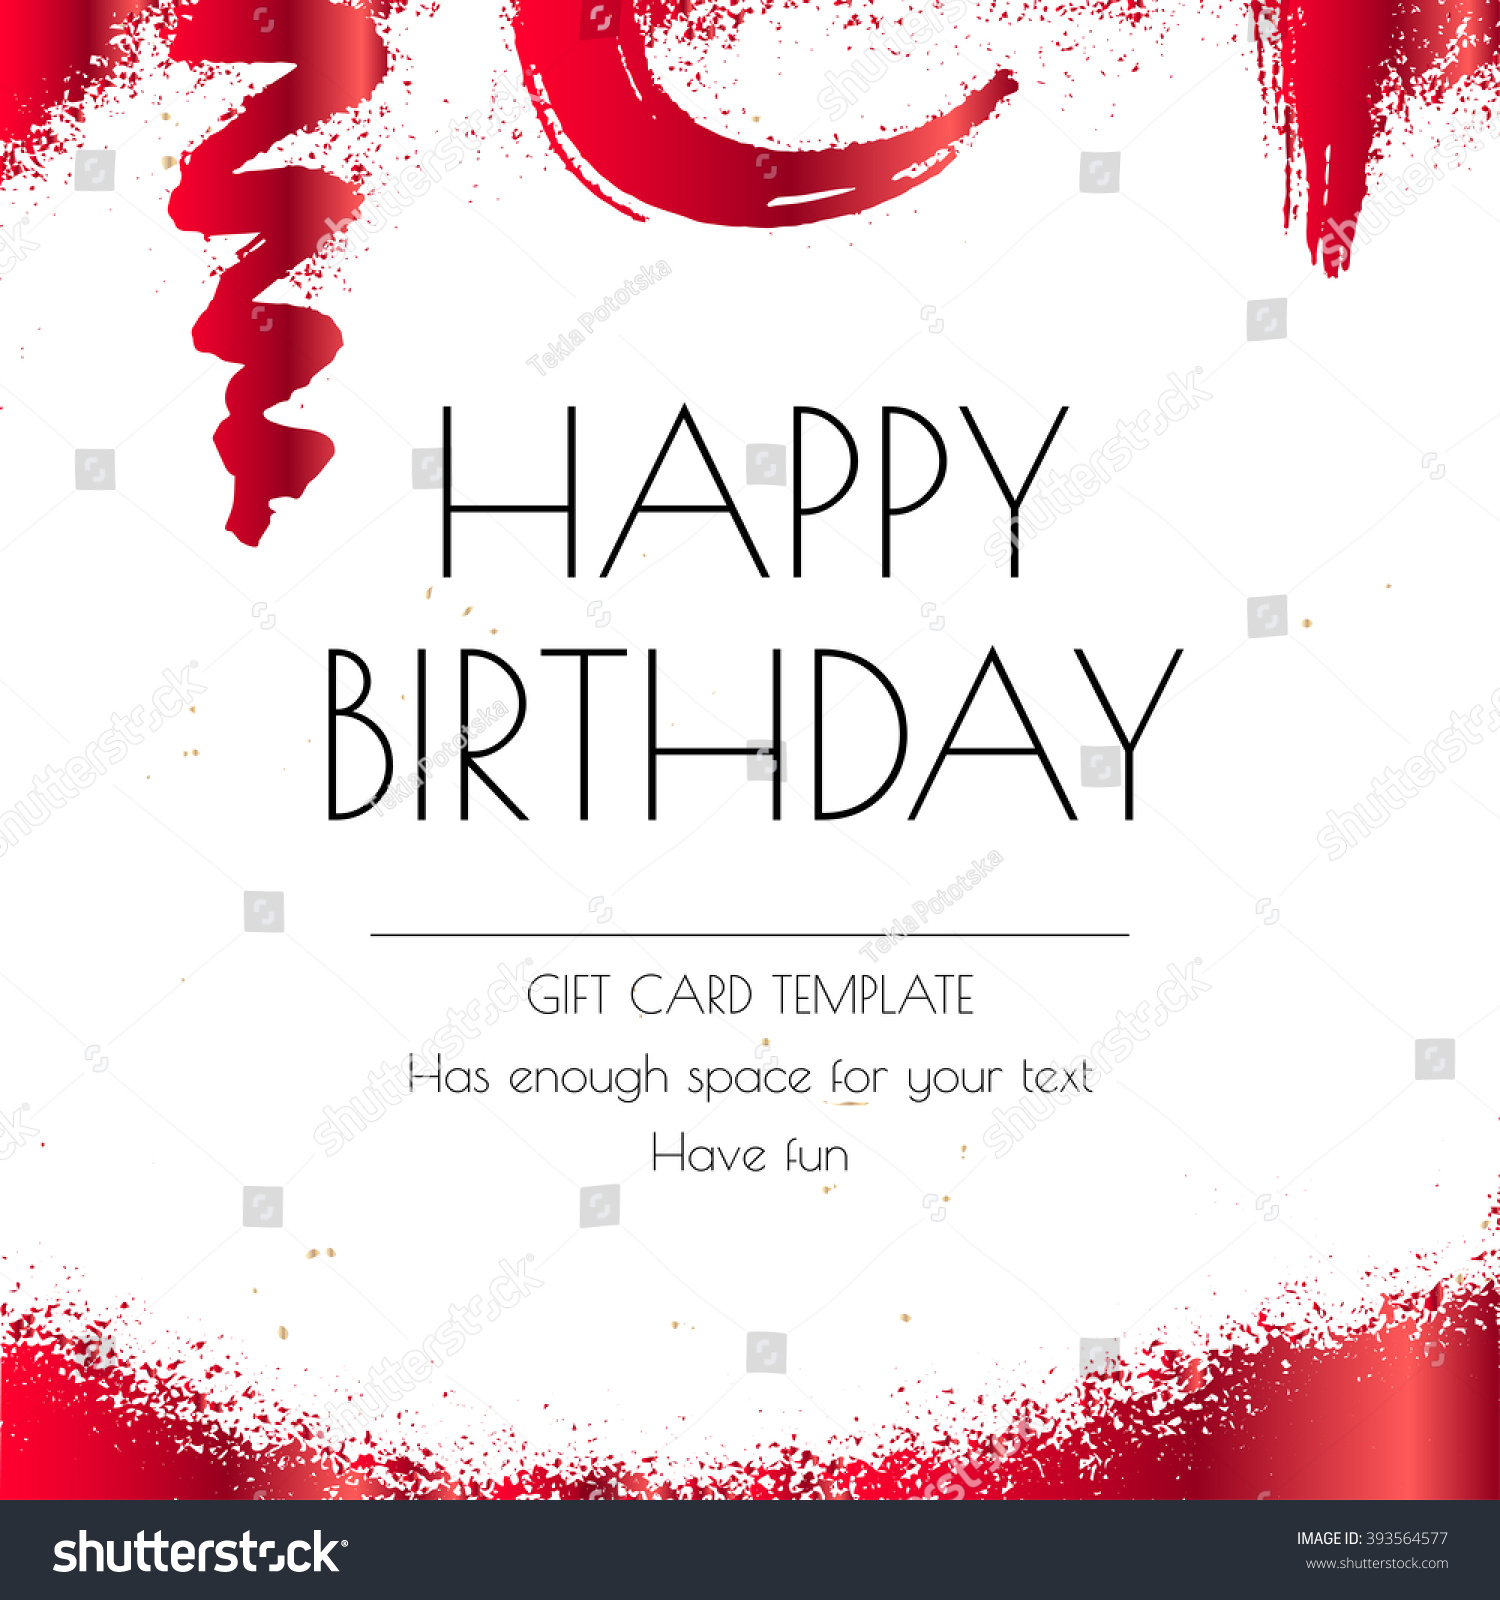 Thank You Card Indesign Template ] – Weekly Calendar Throughout Indesign Birthday Card Template